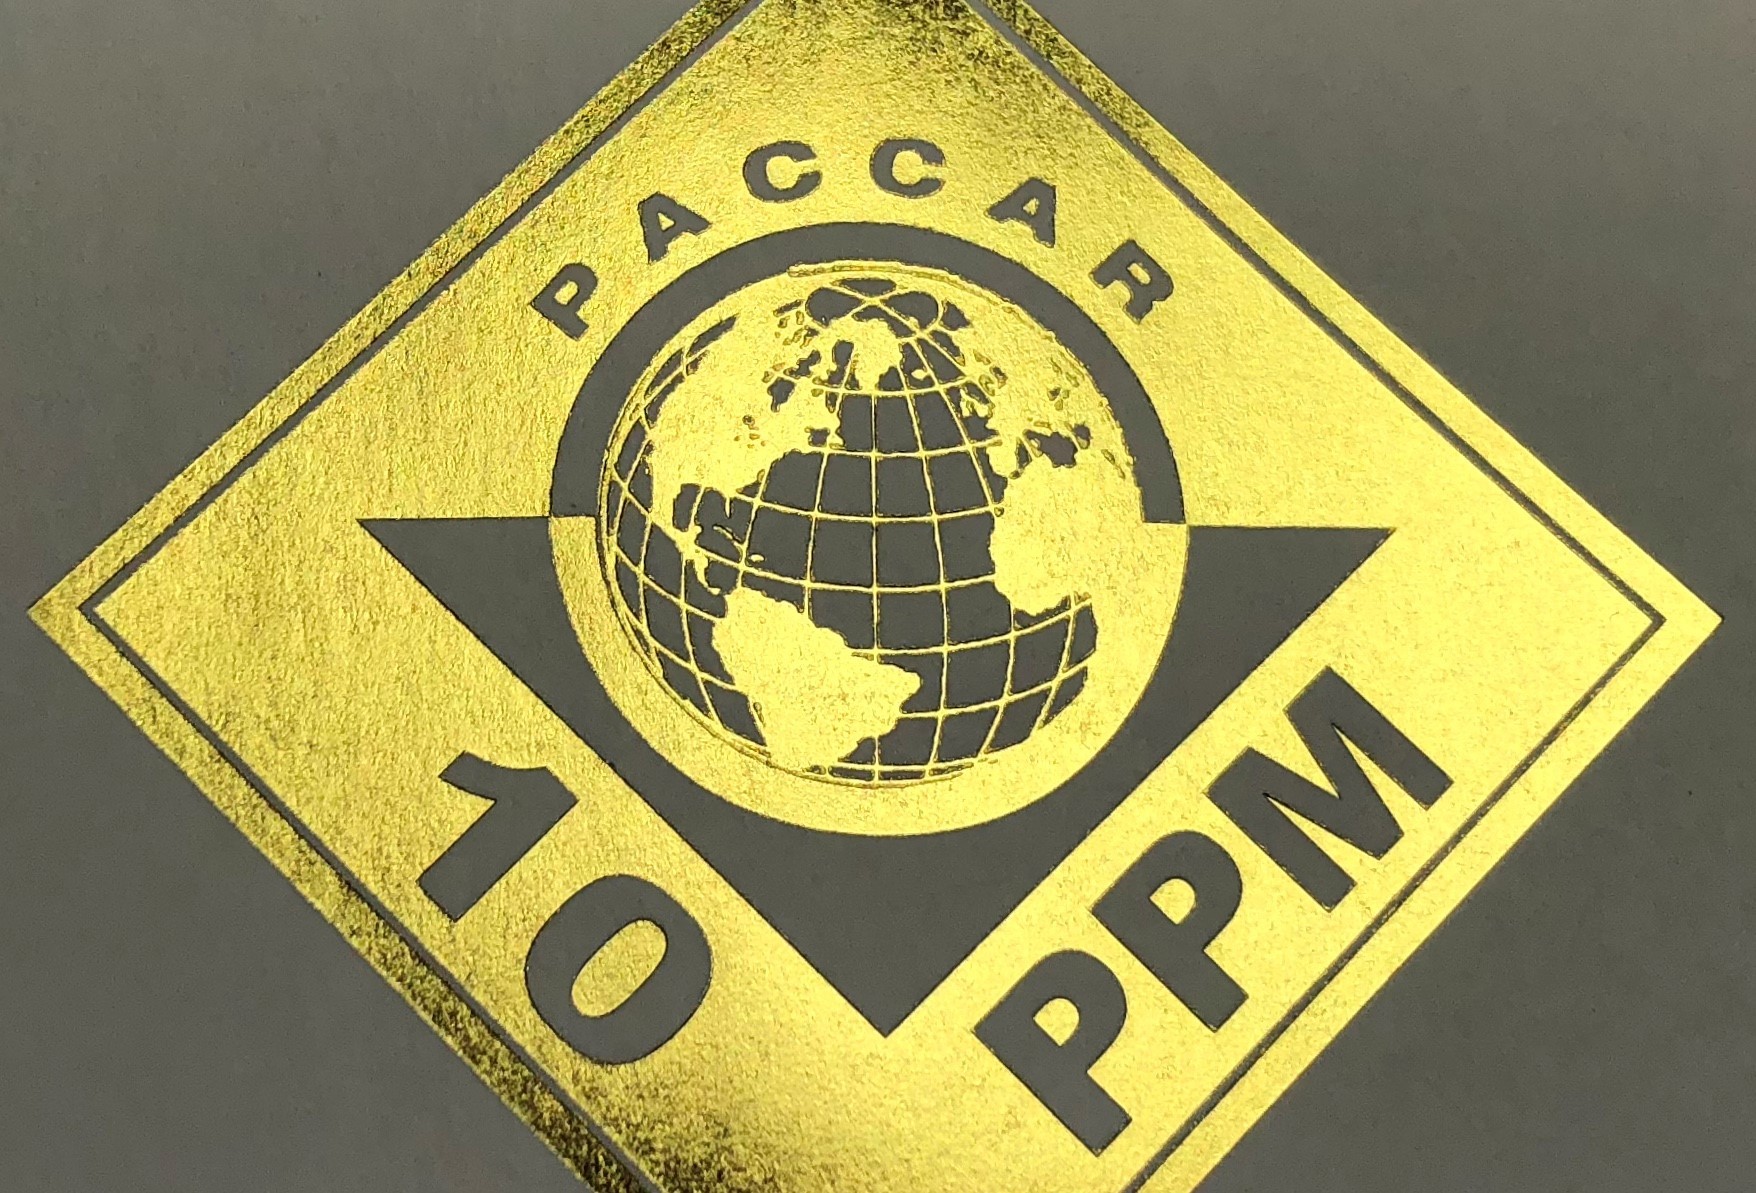 RECMAR Earns 10 PPM Award from PACCAR for 2017